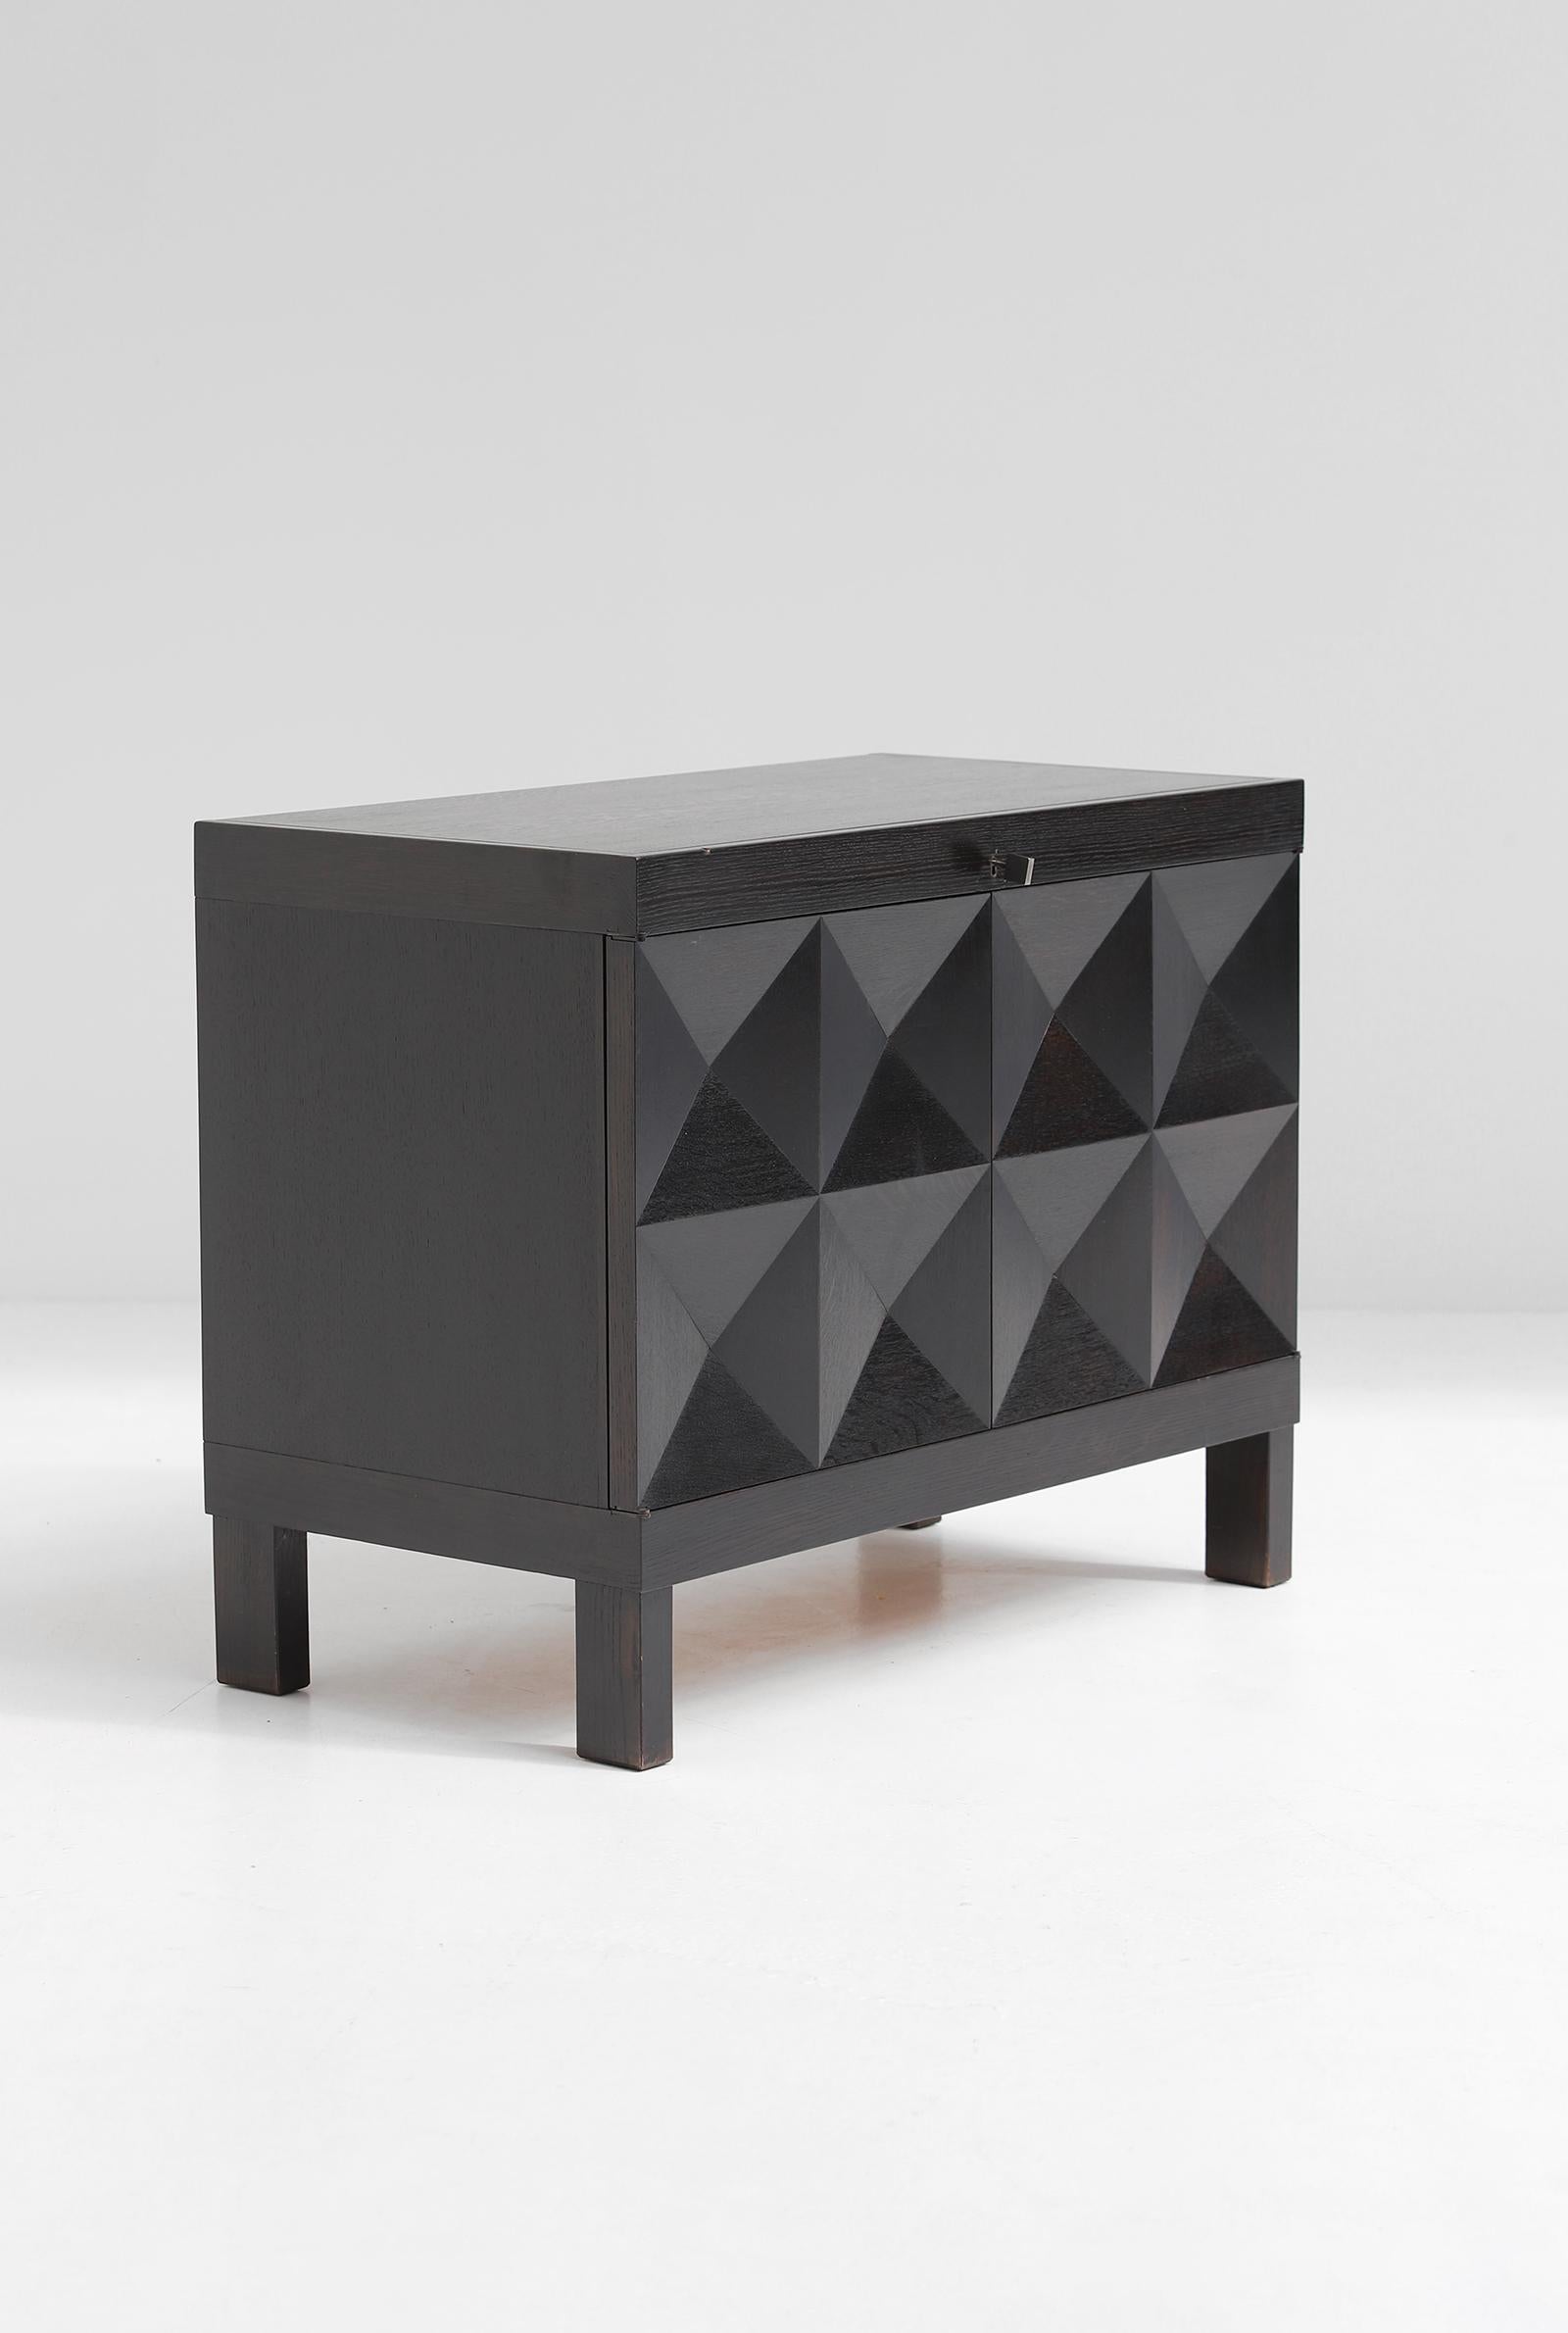 Brutalist cabinet designed by Jean Batenburg for MI, Belgium. The cabinet was designed in 1969 and only produced for a few years. Some dealers do sell this as a product from De Coene, although they cannot provide any documentation. Nevertheless